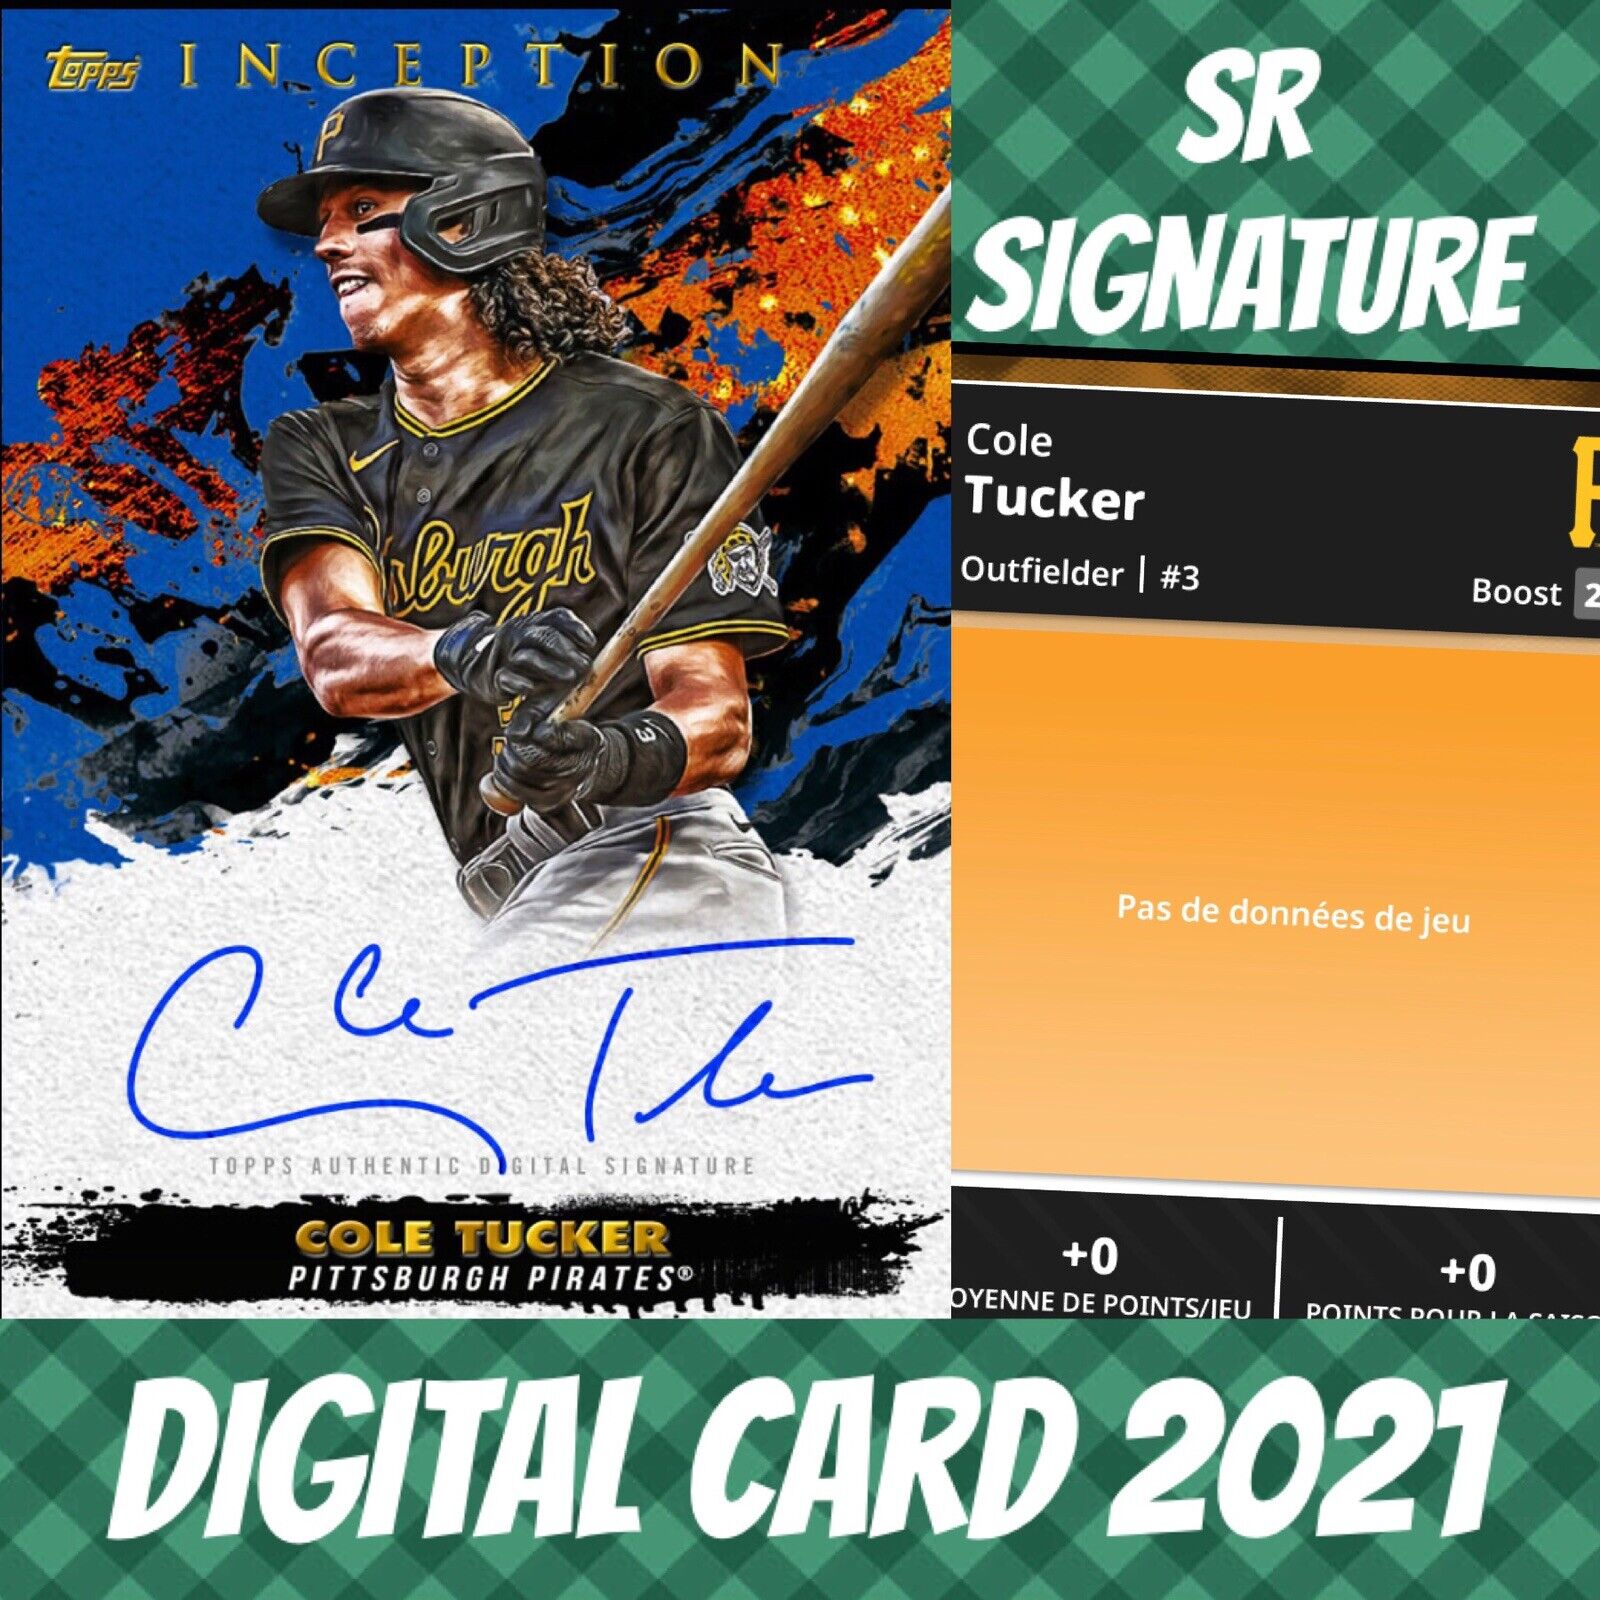 2021 Topps Bunt 21 Cole Tucker Inception Rookies Signature Digital Card S/2